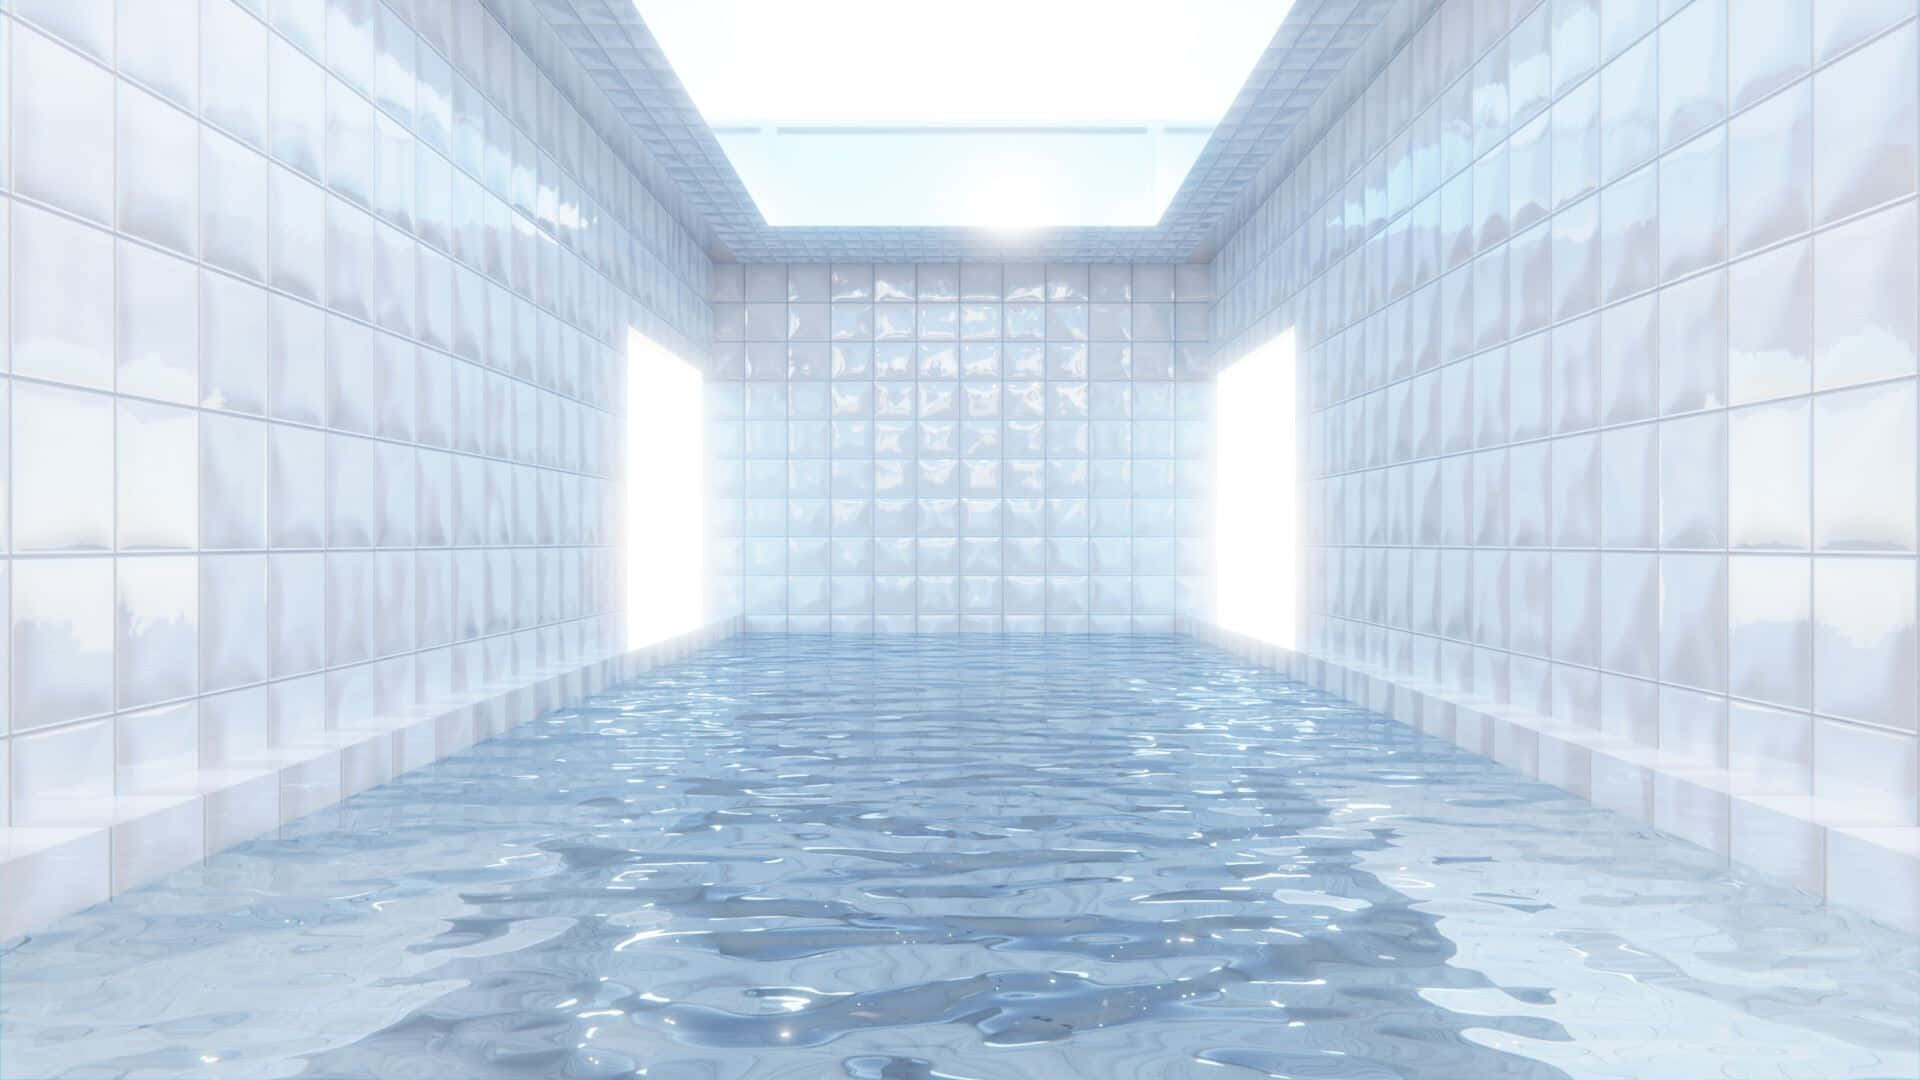 Ethereal Flooded Hallway Wallpaper